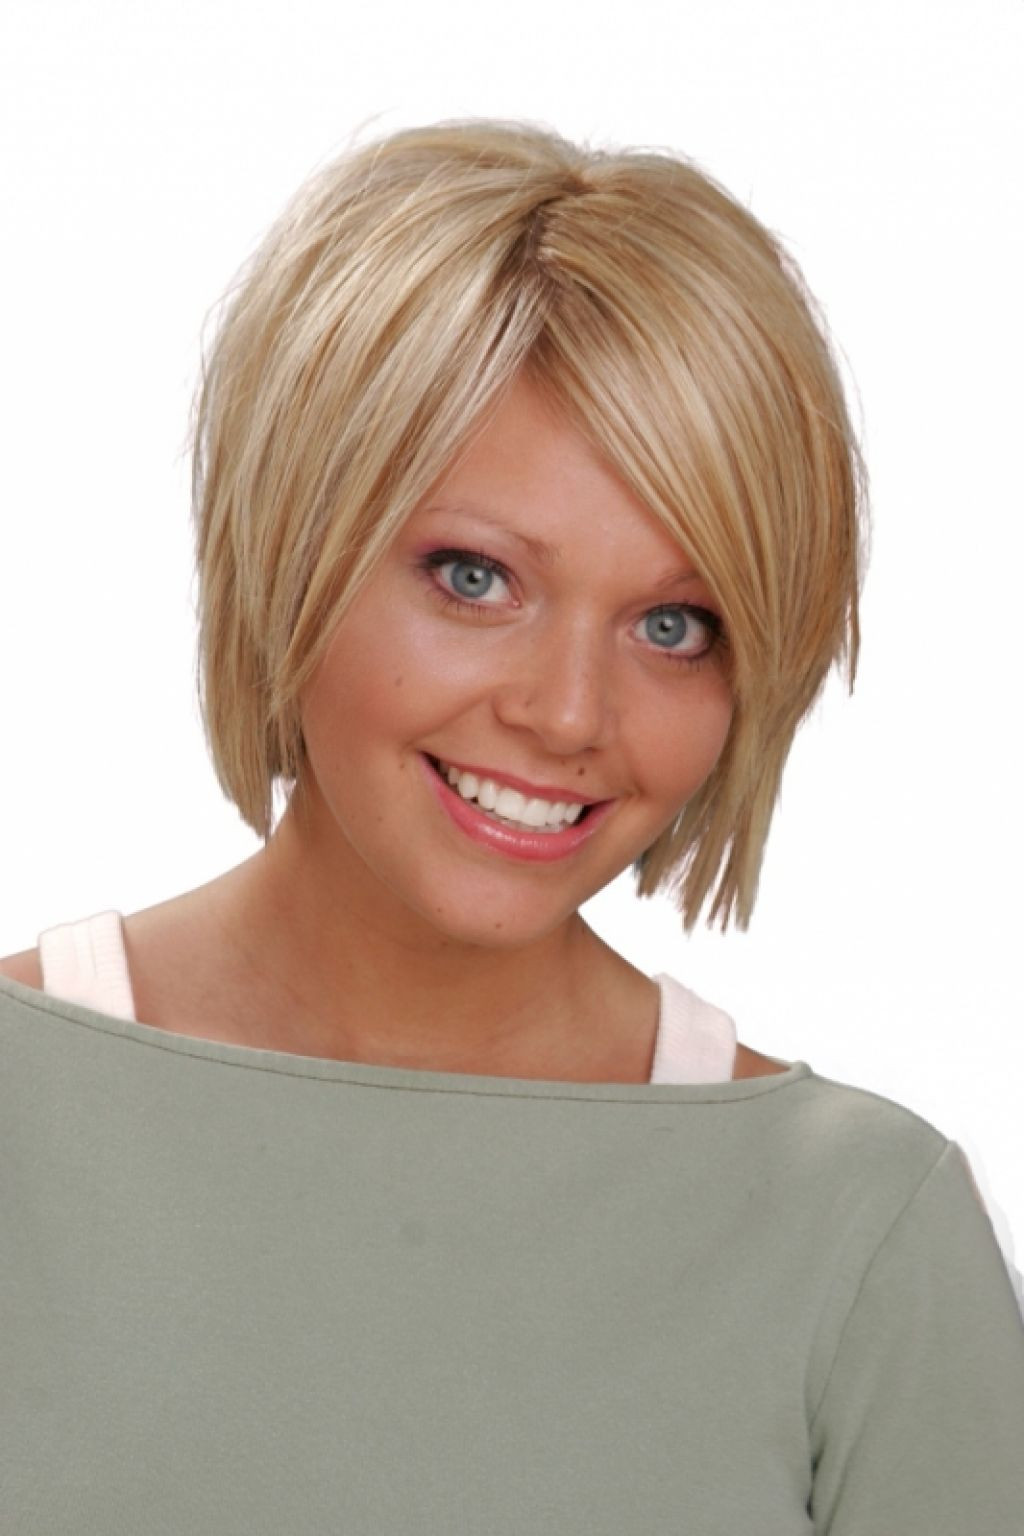 Short Hairstyles For Plus Size Women
 Short Hairstyles For Plus Size Women Elle Hairstyles